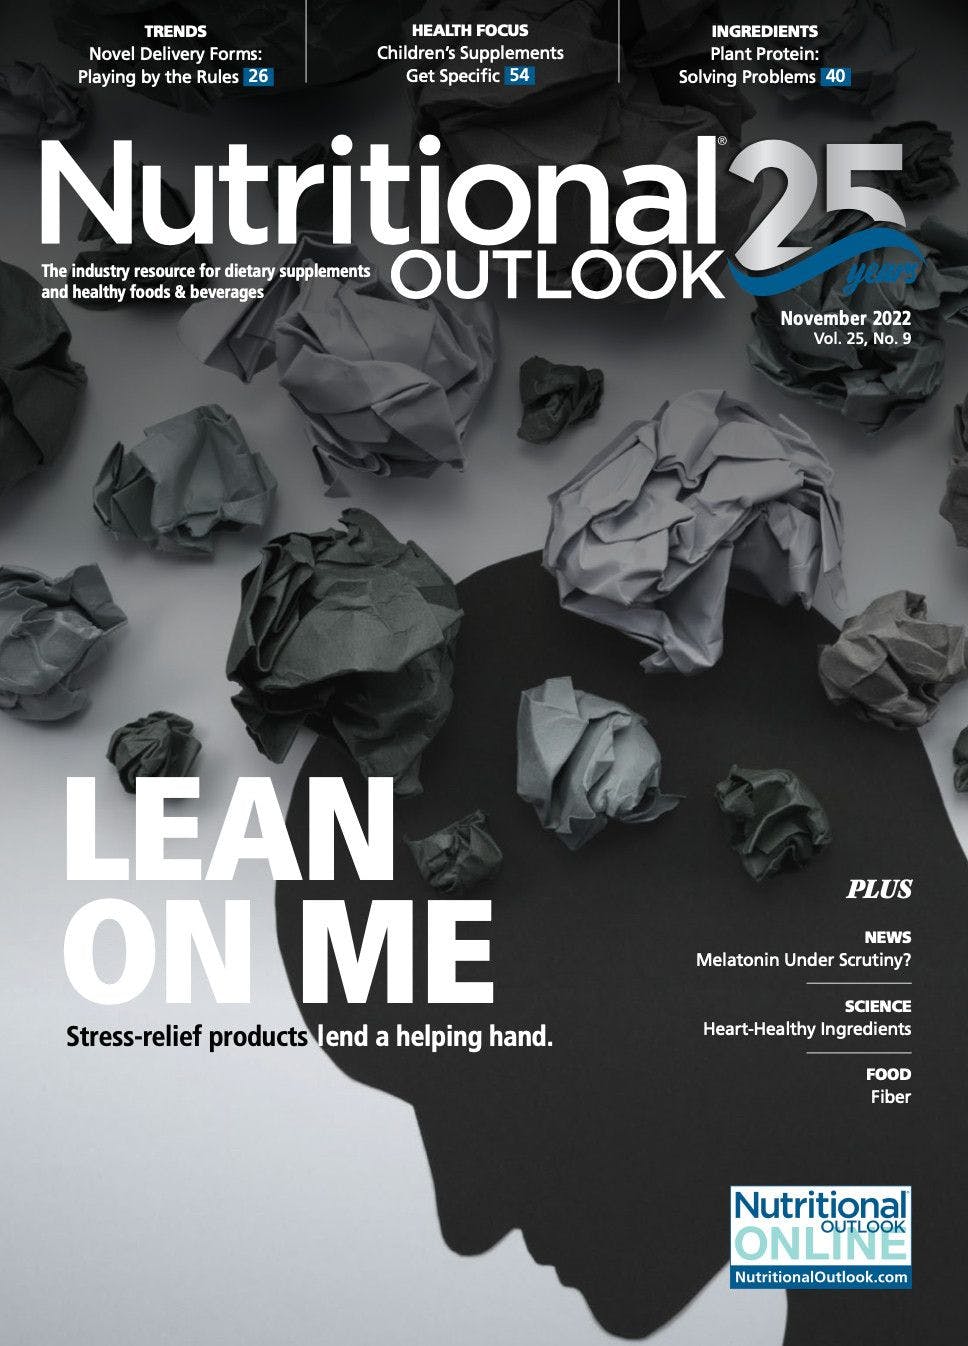 Nutritional Outlook Vol. 25 No. 9